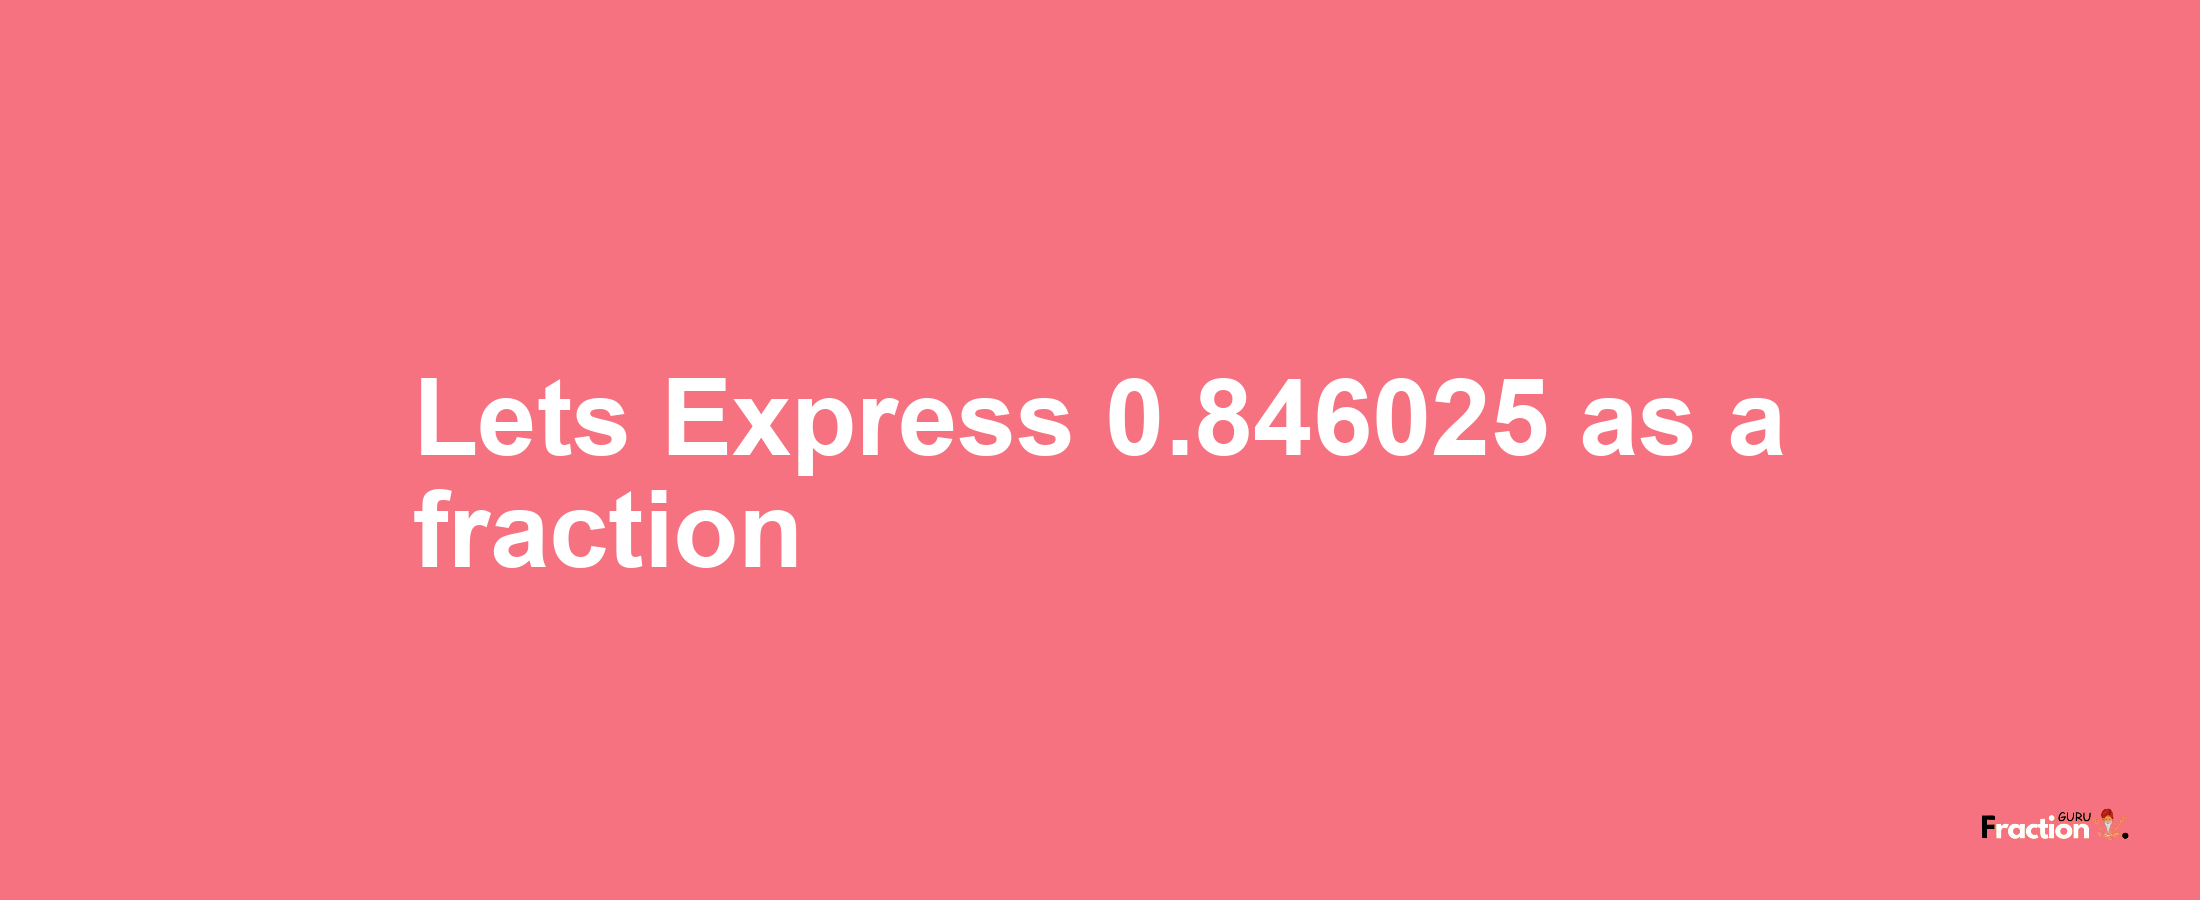 Lets Express 0.846025 as afraction